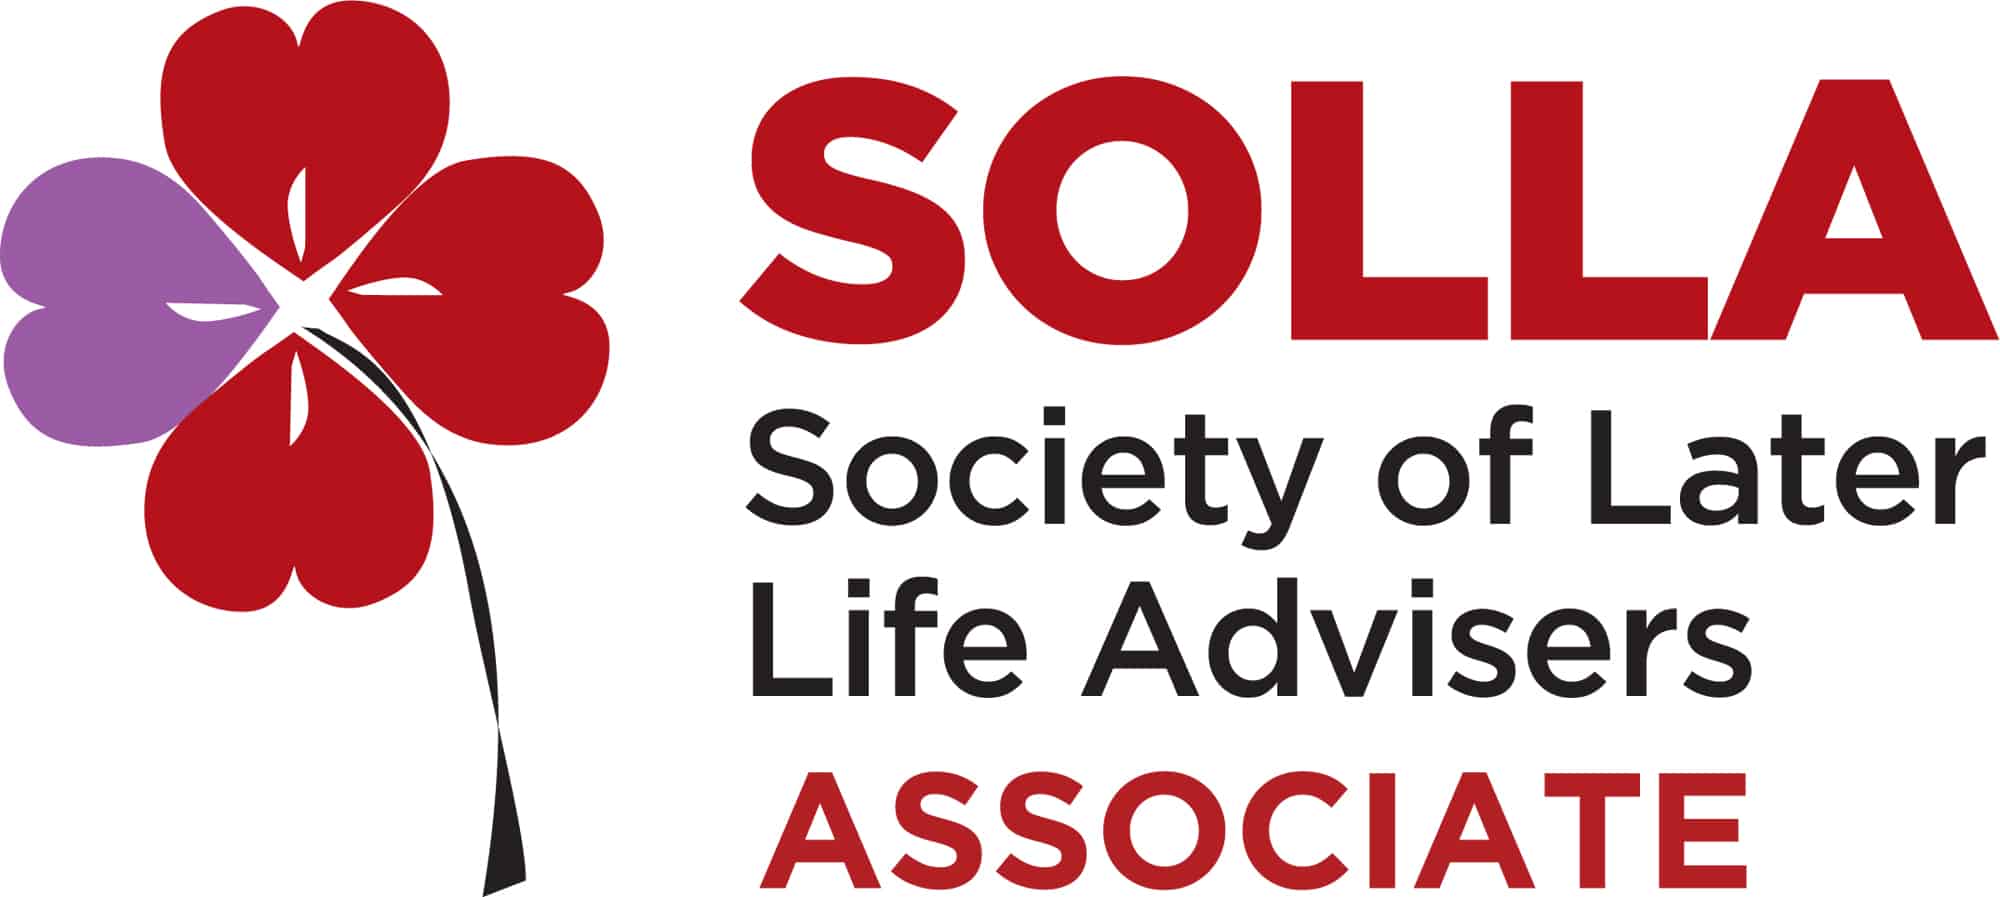 Society of Later Life Advisers - Flower